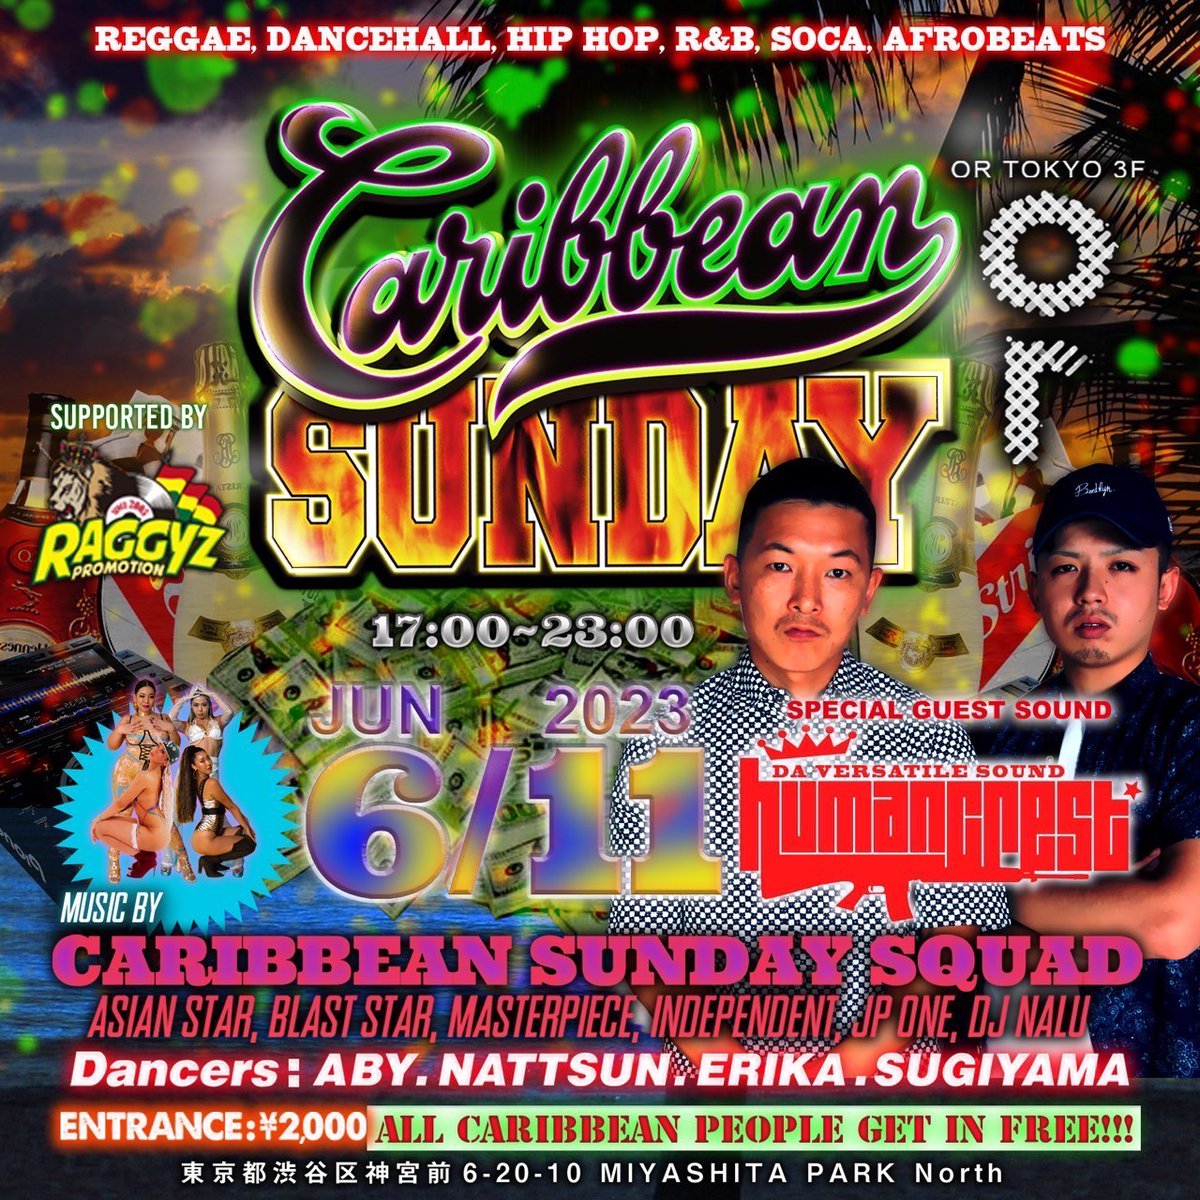 6.11(SUN) CARIBBEAN SUNDAY -supported by RAGGYZ PROMOTION- OPEN : 17:00-23:00 ENTRANCE : ¥1,000 / ALL CARIBBEAN GET IN FREE SPECIAL GUEST SOUND : HUMANGOEST HOST SOUND : CARIBBEAN SUNDAY SQUAD <ASIAN STAR / BLAST STAR / MASTERPIECE SOUND / INDEPENDENT/ JP ONE / DJ NALU>